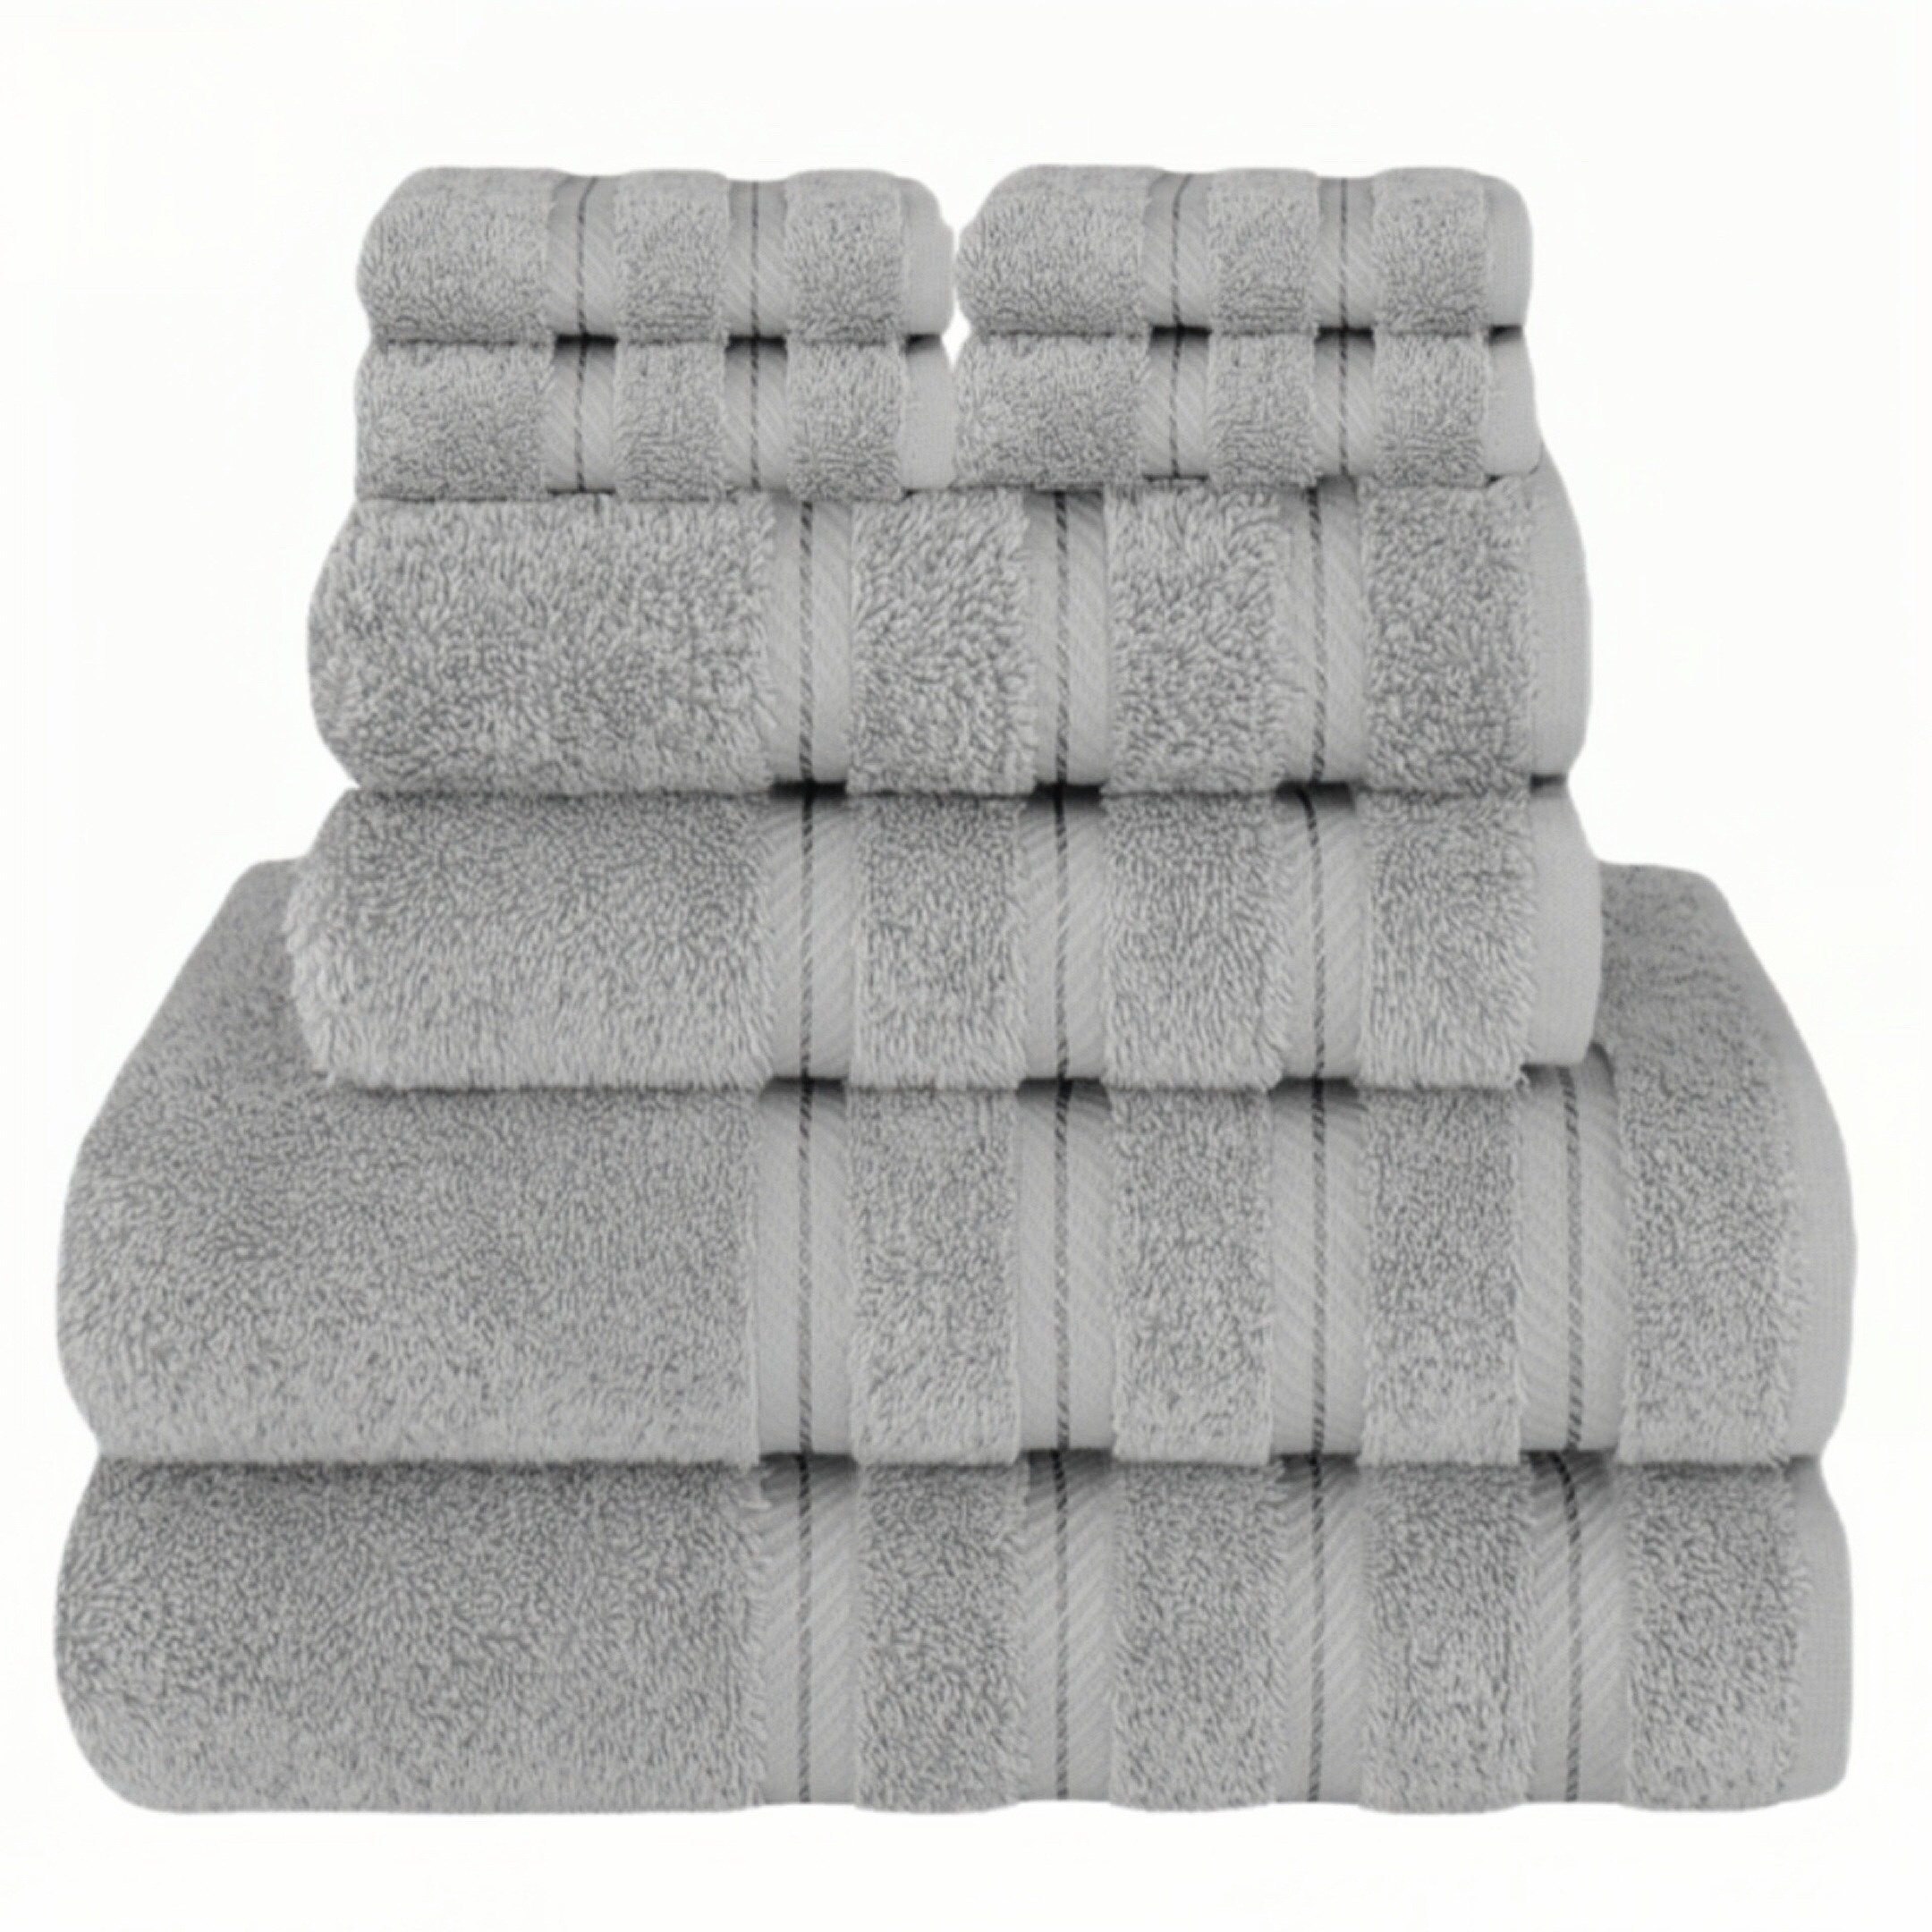 Nice cotton bath towels, set of 5 - household items - by owner